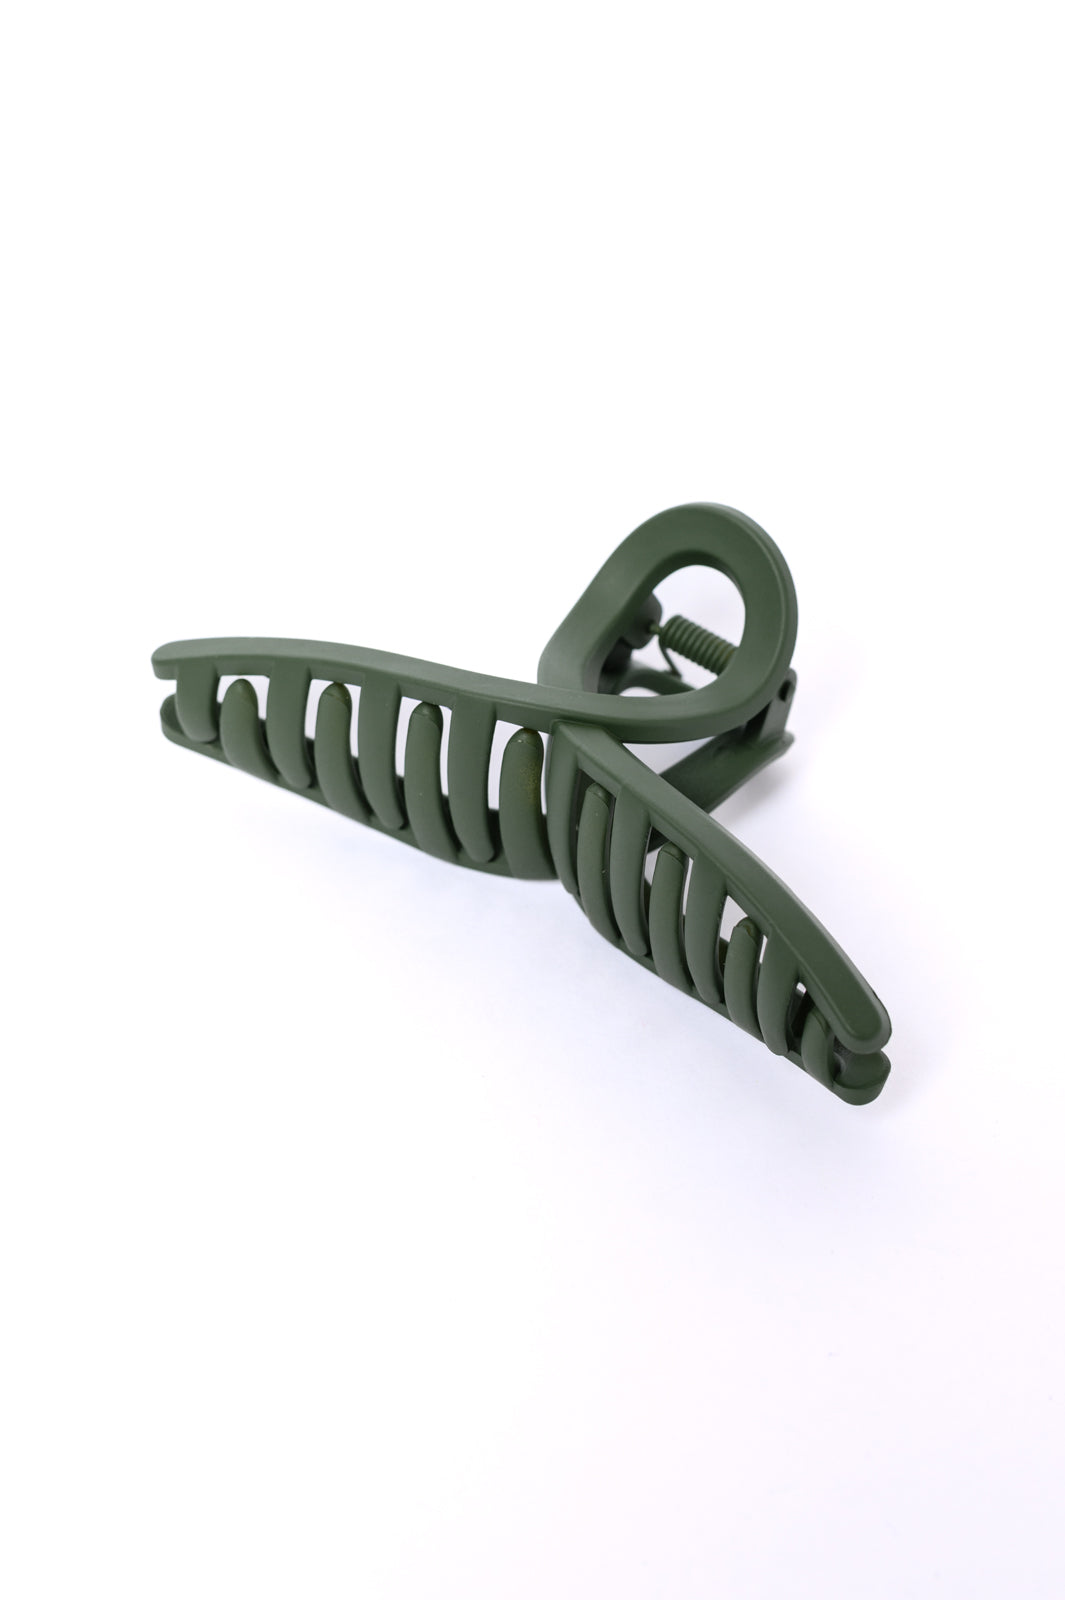 Claw Clip Set of 4 in Forest Green (Ships in 1-2 Weeks)